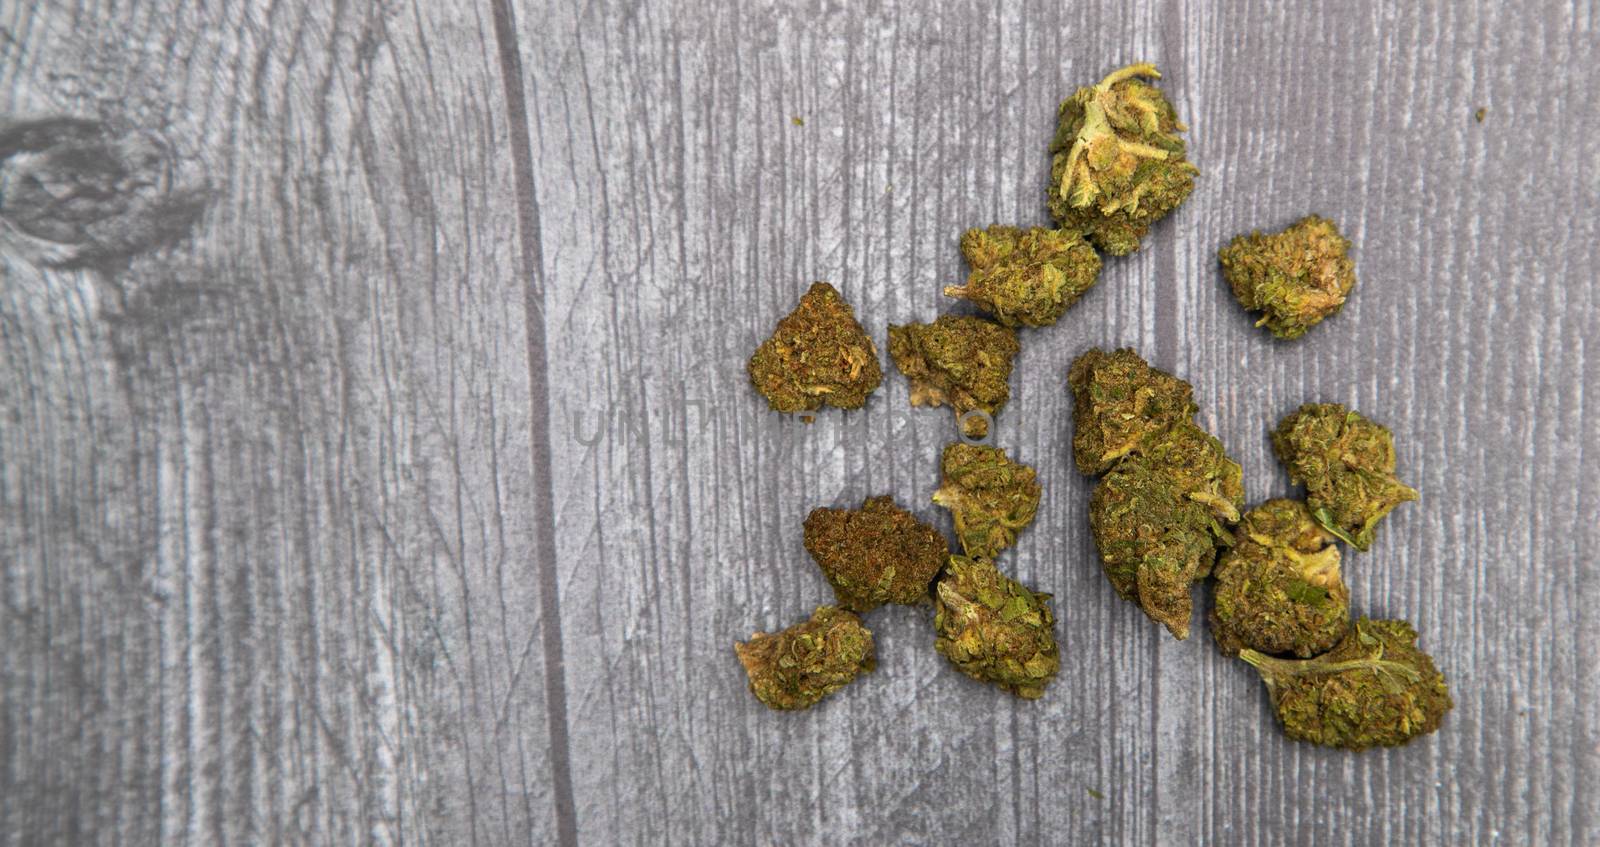 Several buds of medicinal marijuana sit on a wooden surface. Bright green with some orange and purple.